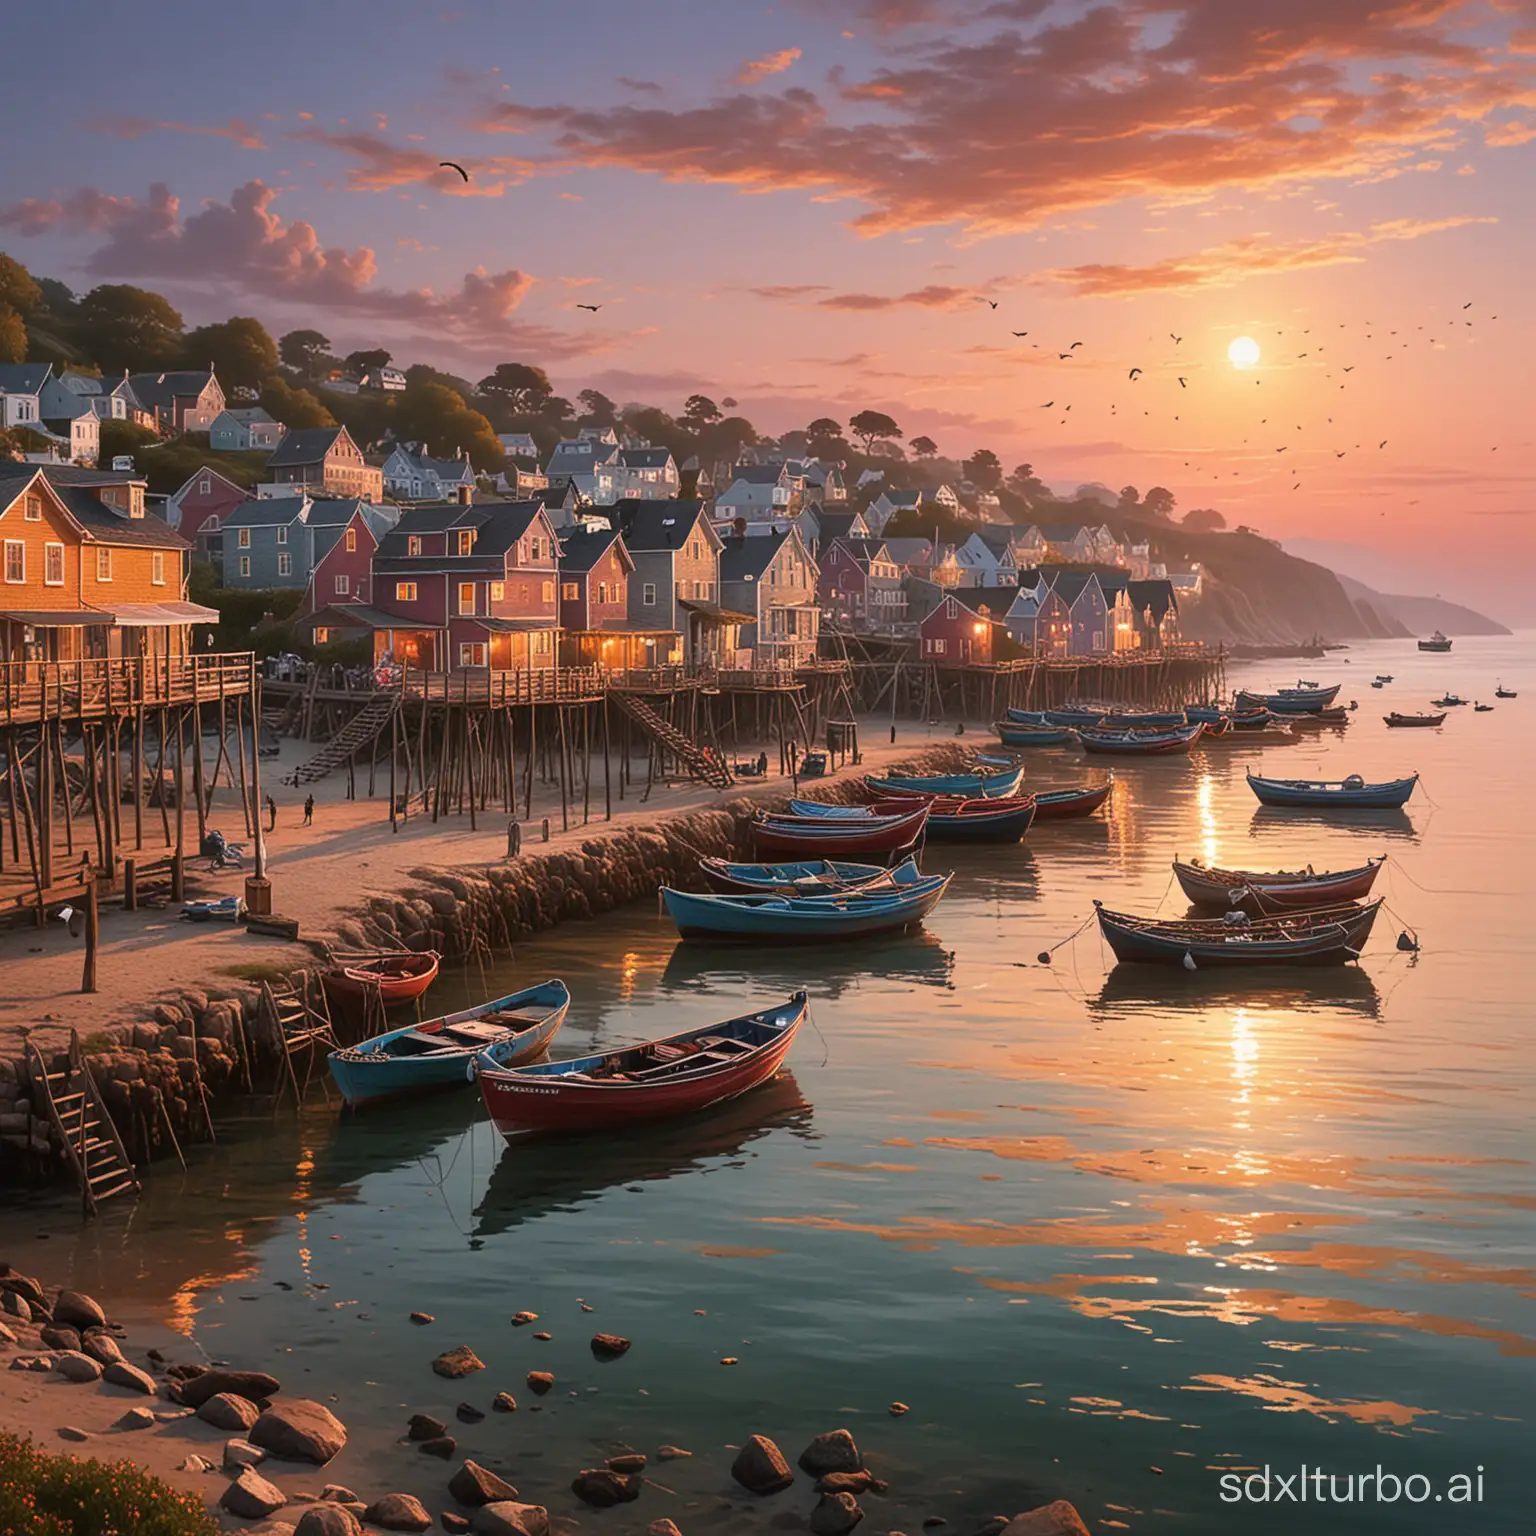 "Visualize a picturesque scene of a fishing village at dusk, with colorful boats moored along the coastline and fishing nets hanging out to dry, while the sky transitions into hues of orange and pink. The quaint cottages nestled along the shore exude a sense of cozy warmth, their windows aglow with the soft light of evening. As the sun dips below the horizon, casting a golden glow over the tranquil scene, the village comes alive with the bustle of fishermen returning from their day's work. Seagulls swoop and cry overhead, adding to the atmosphere of maritime charm. Every detail, from the weathered hulls of the fishing boats to the intricate patterns of the nets, tells a story of tradition and livelihood. It's a moment of quiet beauty, reminiscent of the idyllic coastal scenes captured by artists like Winslow Homer, who found inspiration in the simple rhythms of seaside life."